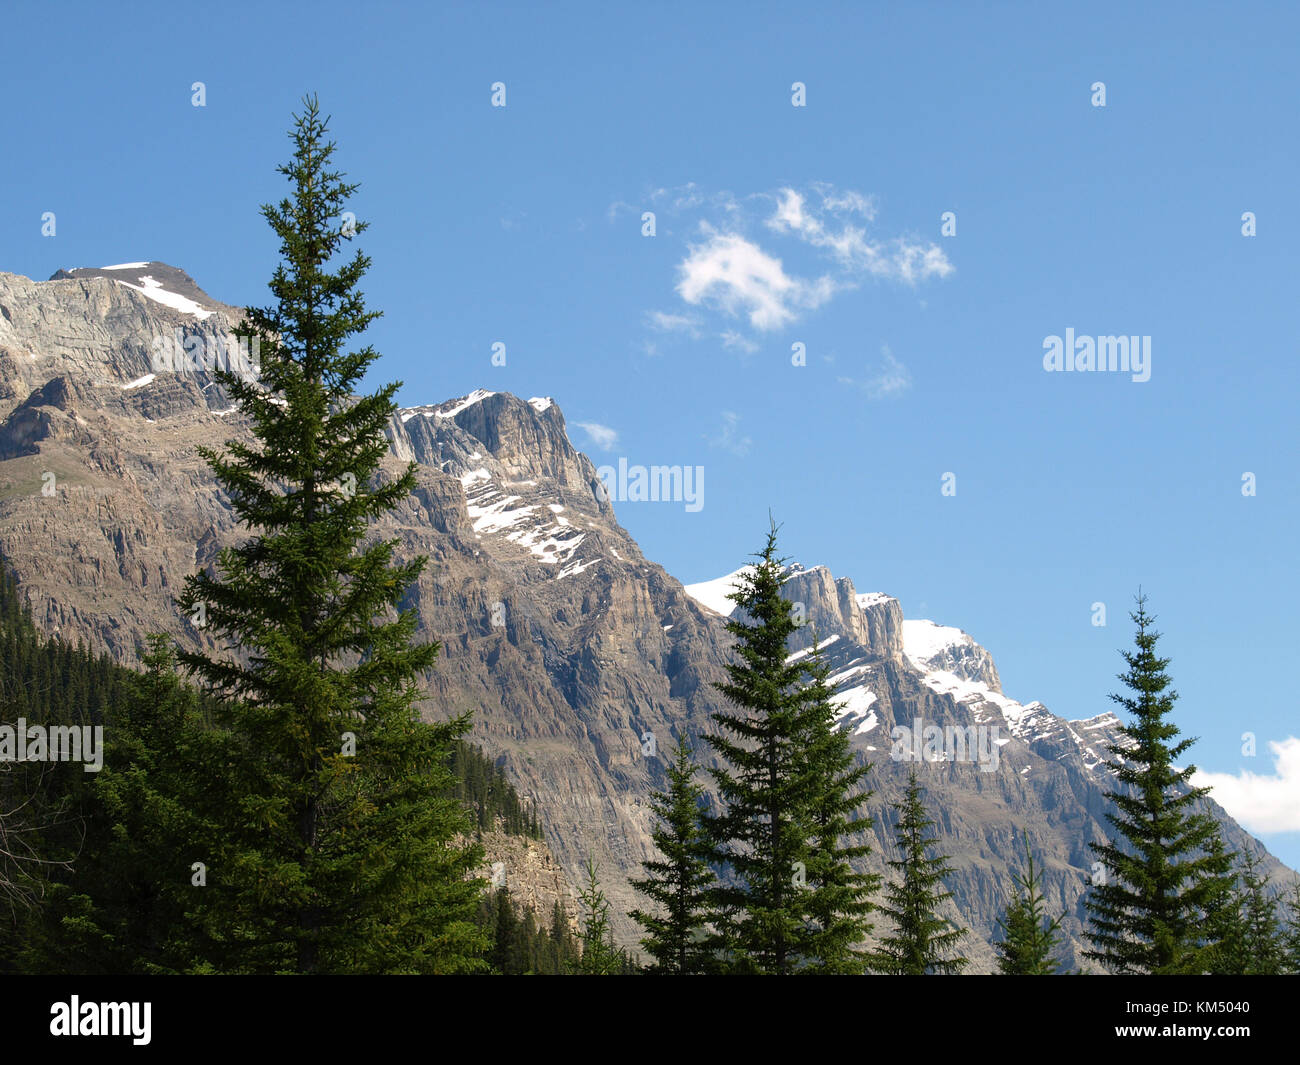 Three tall Spruce Trees Stand in Front of Three dramatic Rocky Mountain Peaks. Taken along Highway 93 between jasper and Banff, Alberta, Canada Stock Photo